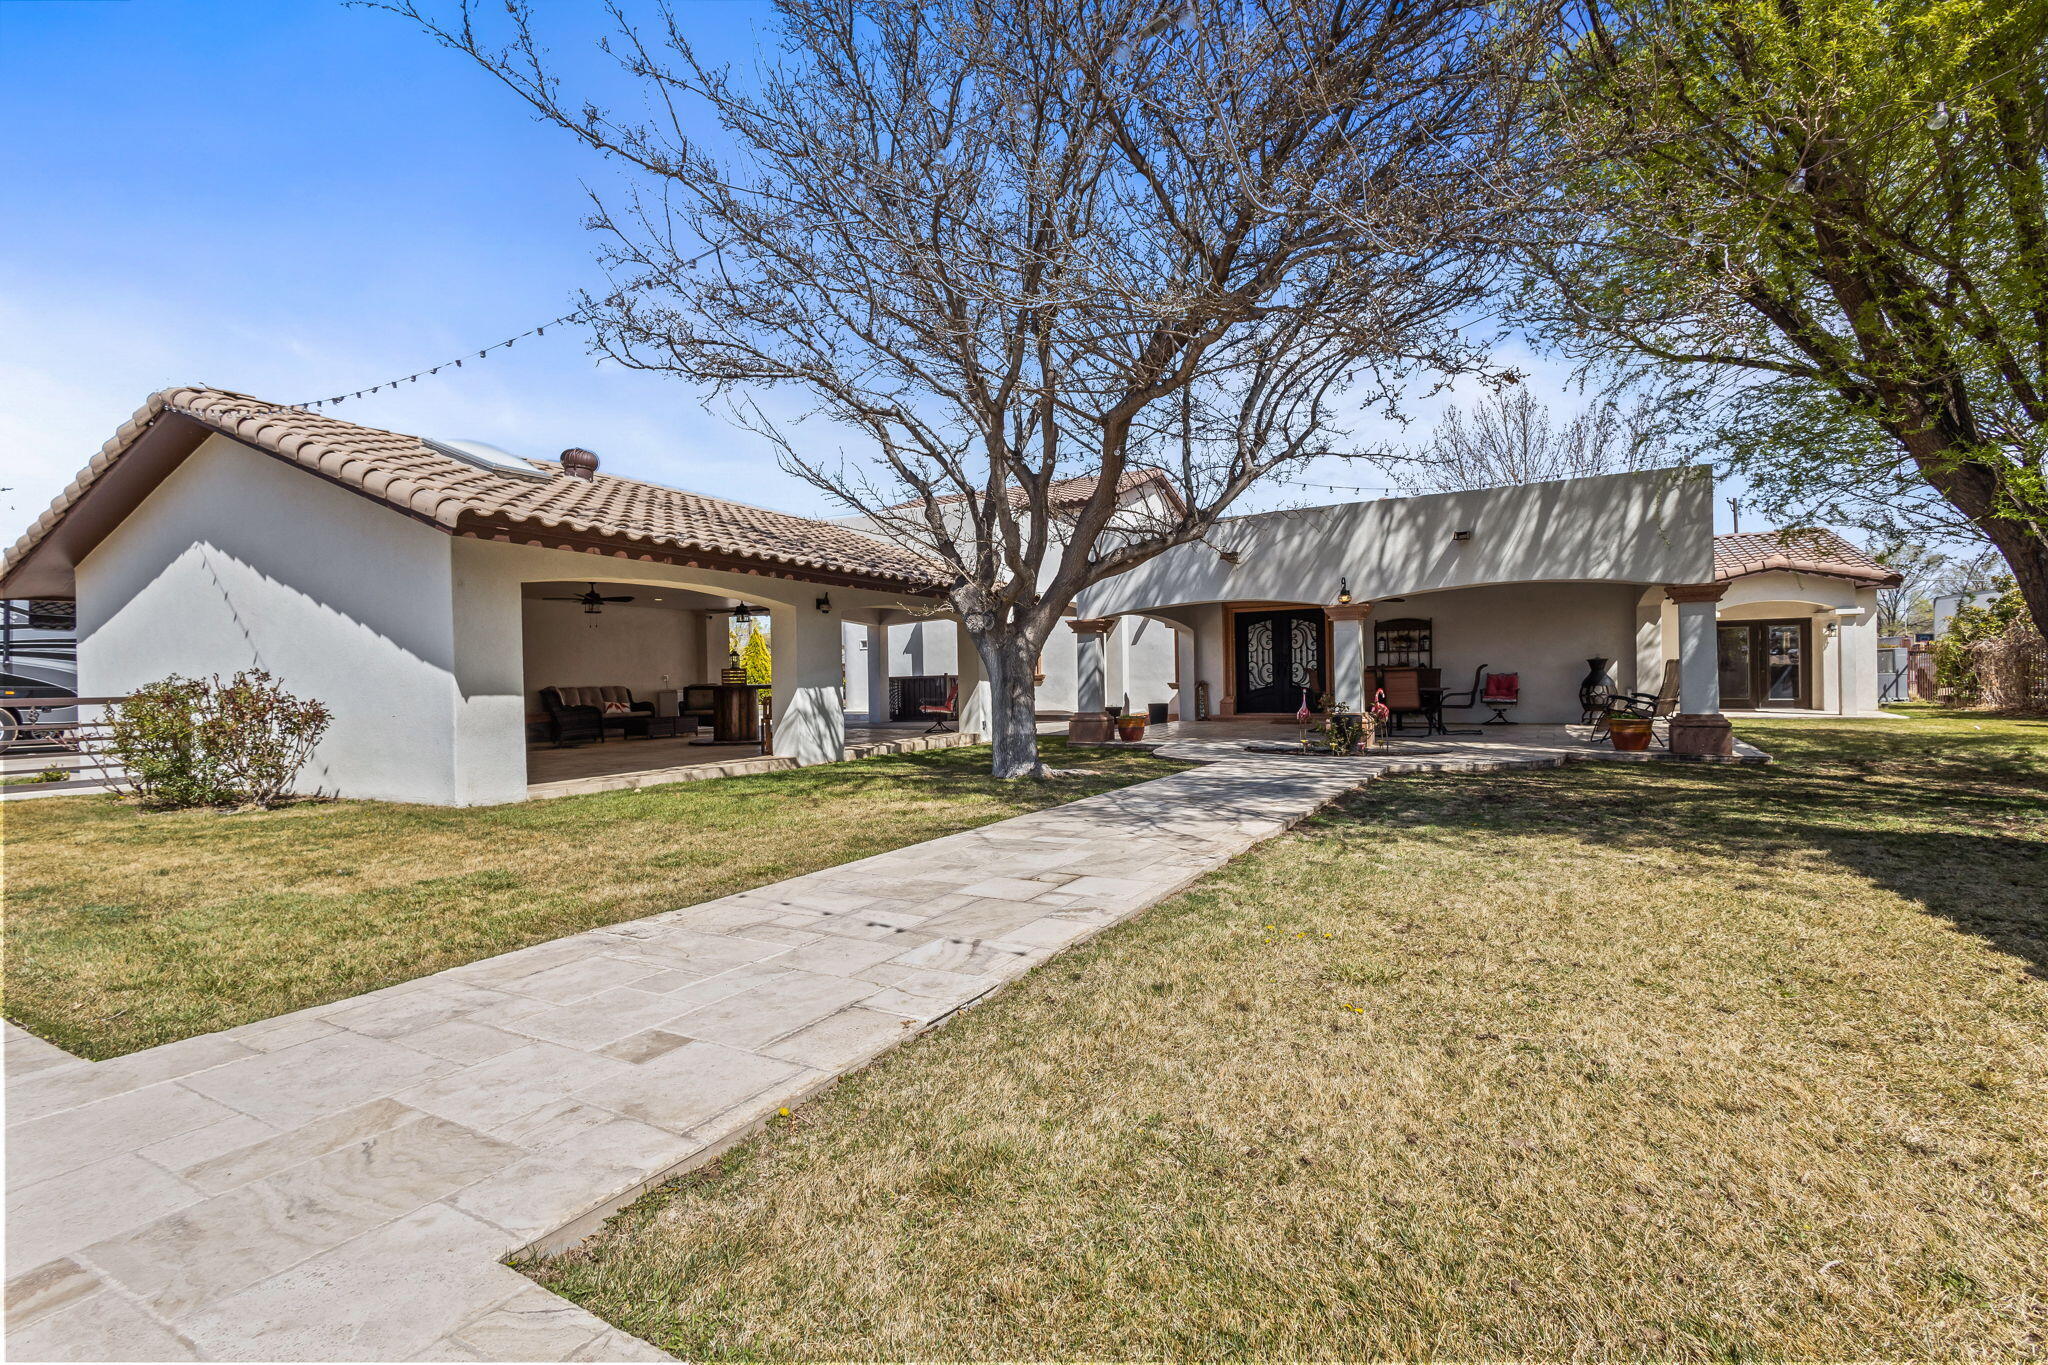 2733 Foothill Drive SW, Albuquerque, New Mexico 87105, 4 Bedrooms Bedrooms, ,4 BathroomsBathrooms,Residential,For Sale,2733 Foothill Drive SW,1061193